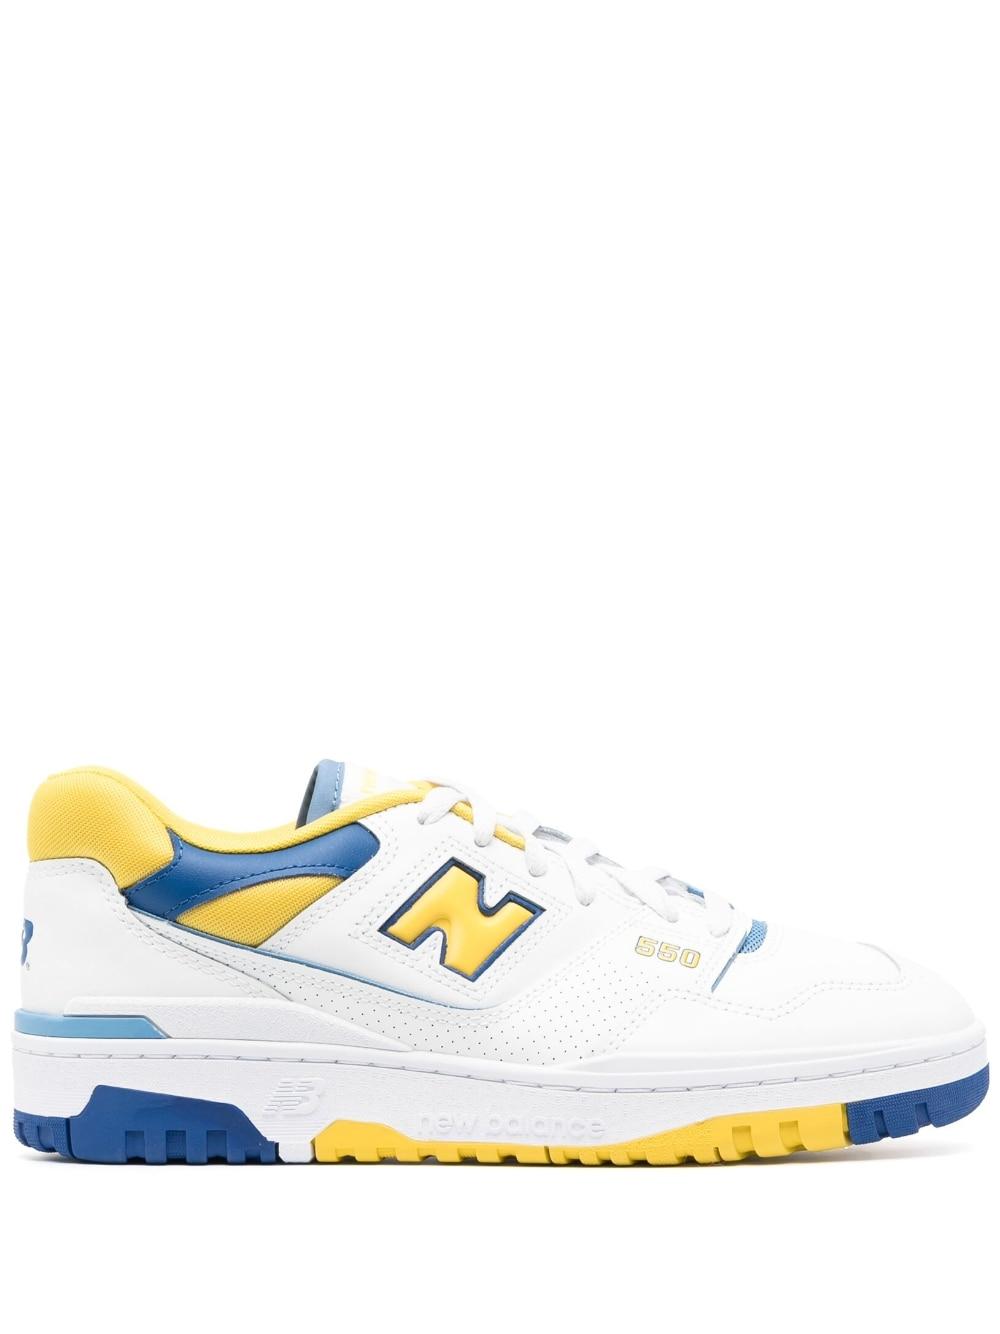 New Balance 550 Sneakers in White for Men